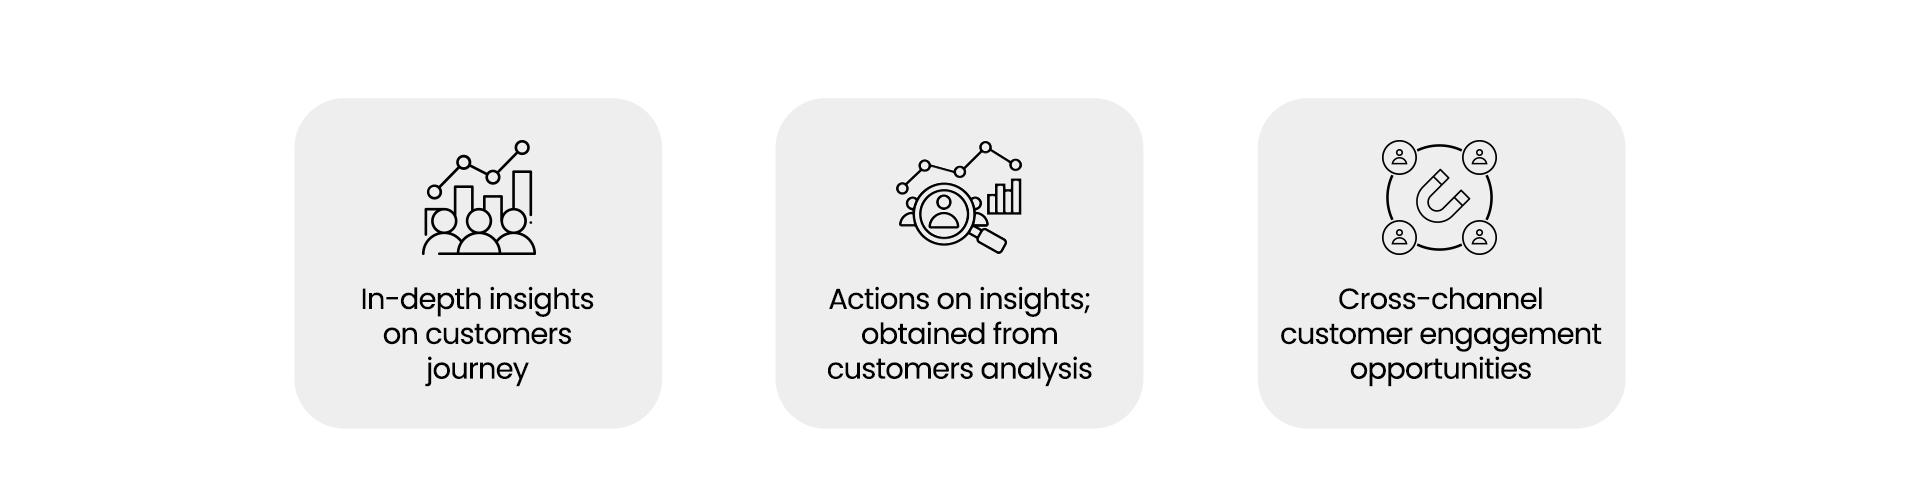 How can customer engagement analytics benefit your business? | Systems limited 